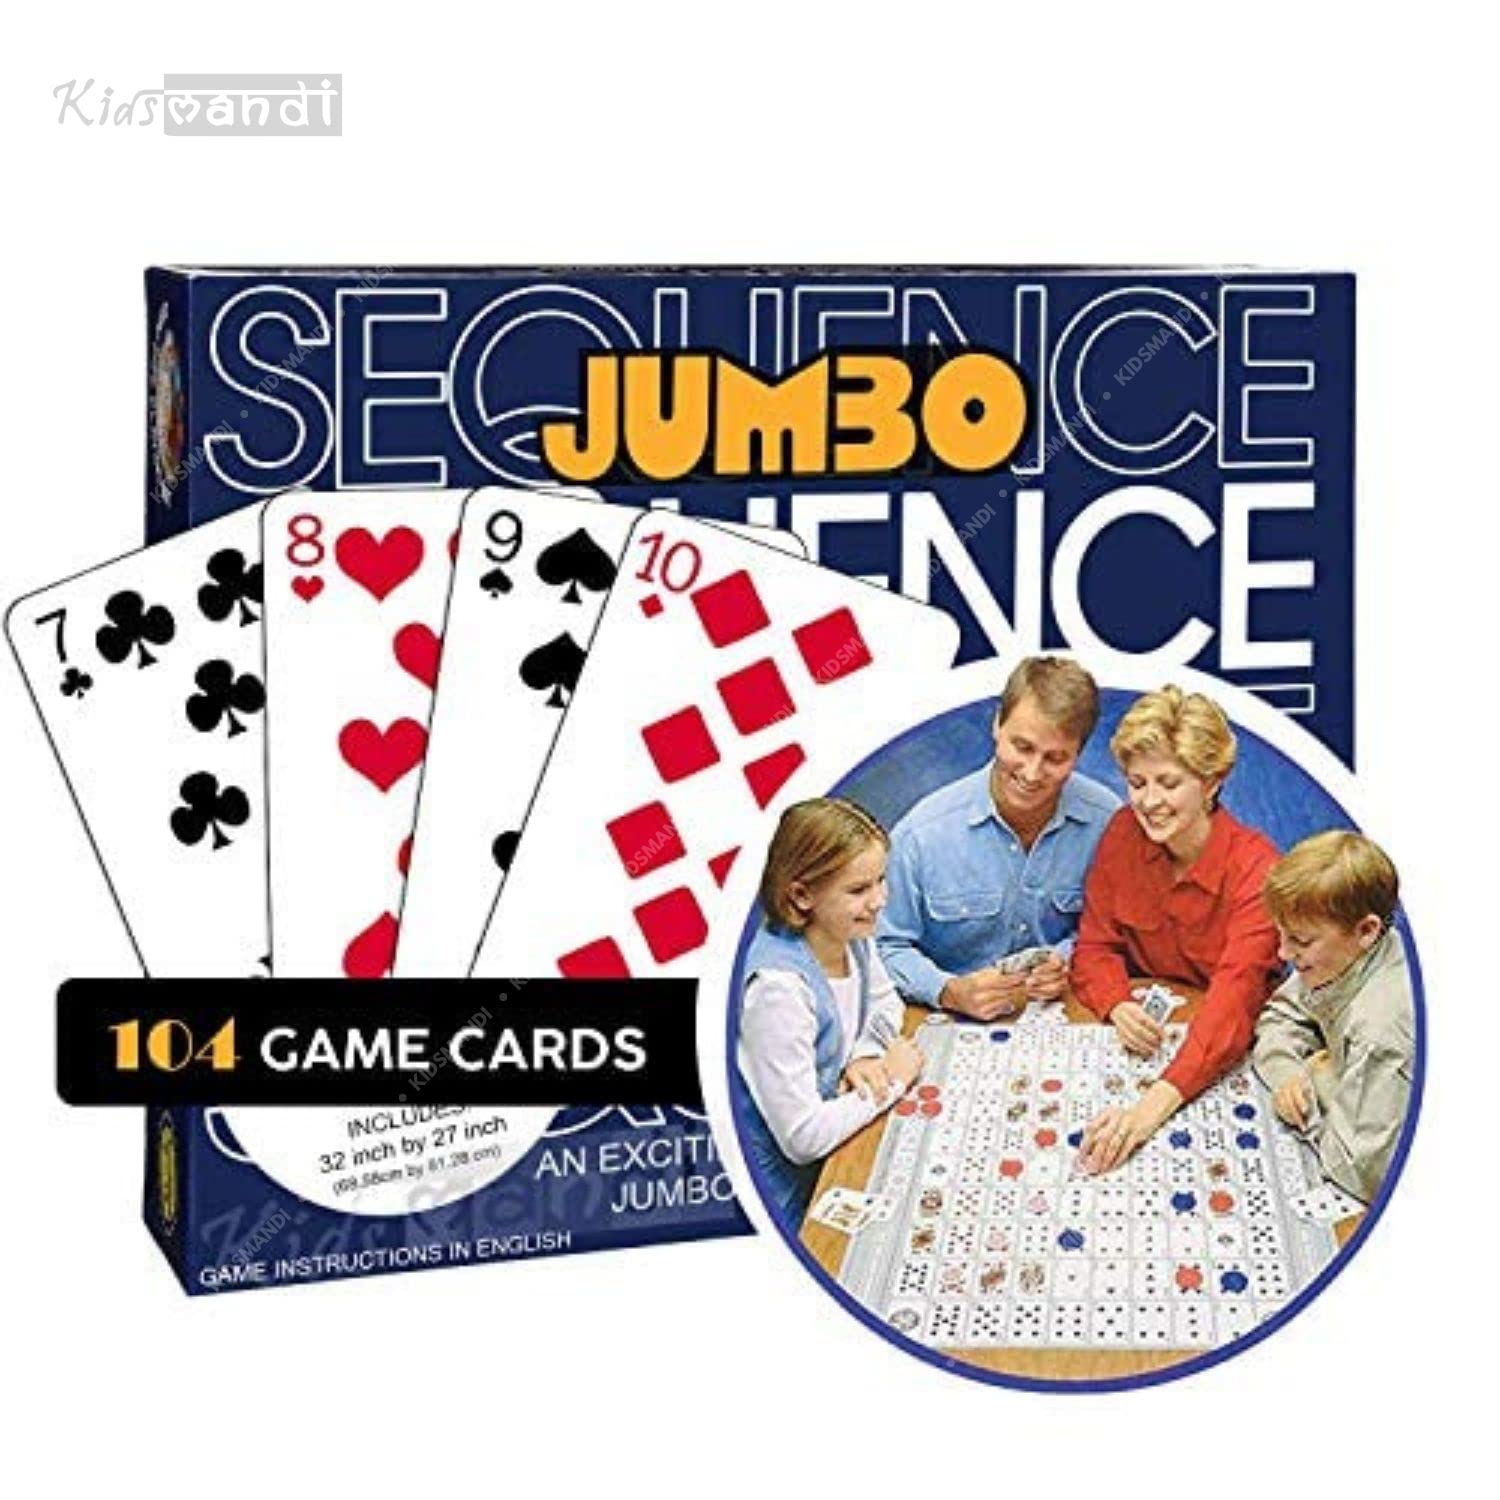 "KIDS MANDI jumbo sequence game with colorful board and cards."